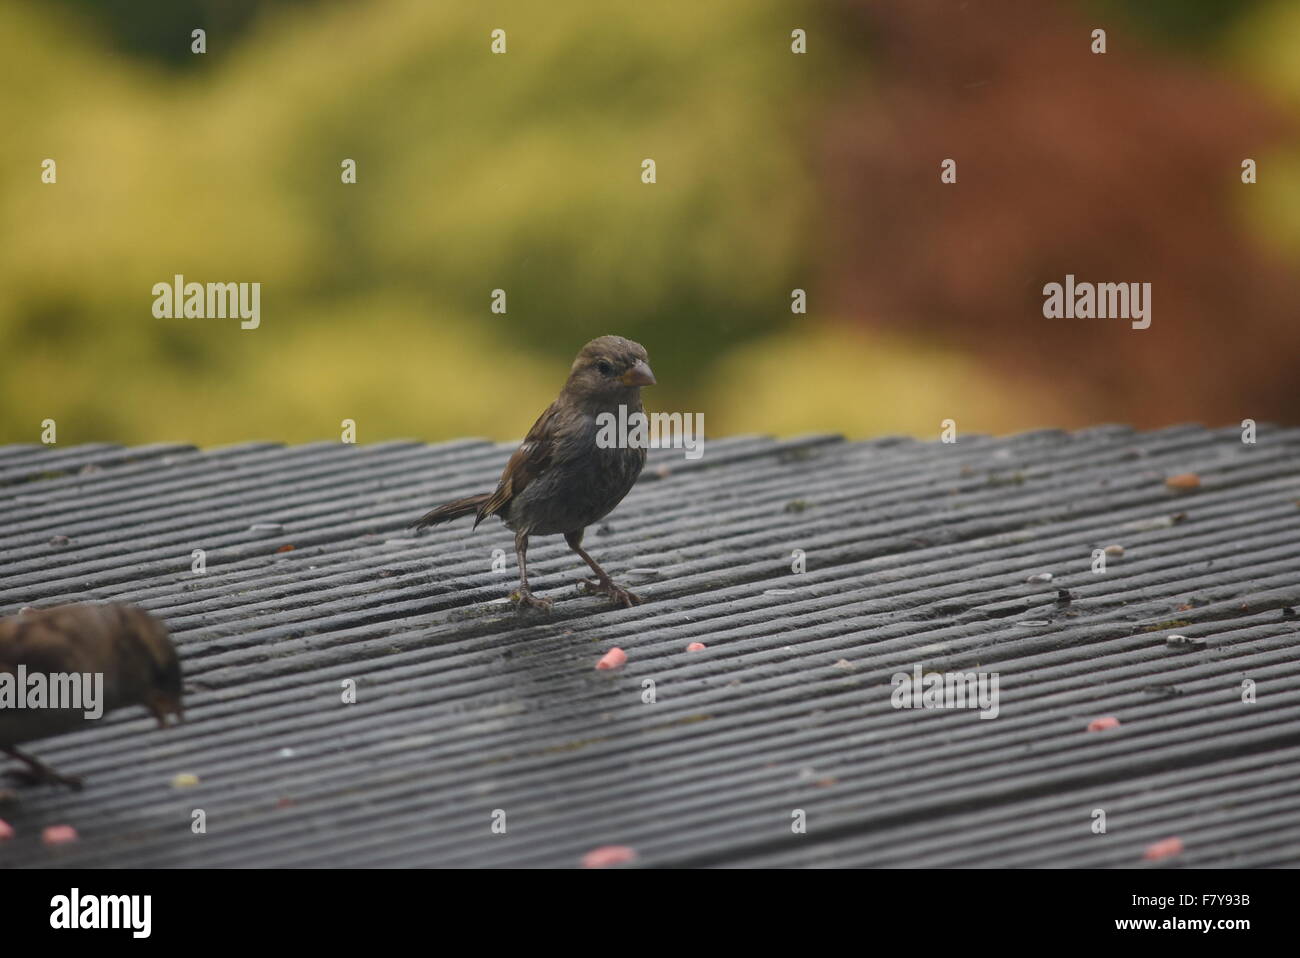 Wales, United Kingdom. July 13 2015. Garden birds pictured eating suet pellets on a decking in Risca. Stock Photo